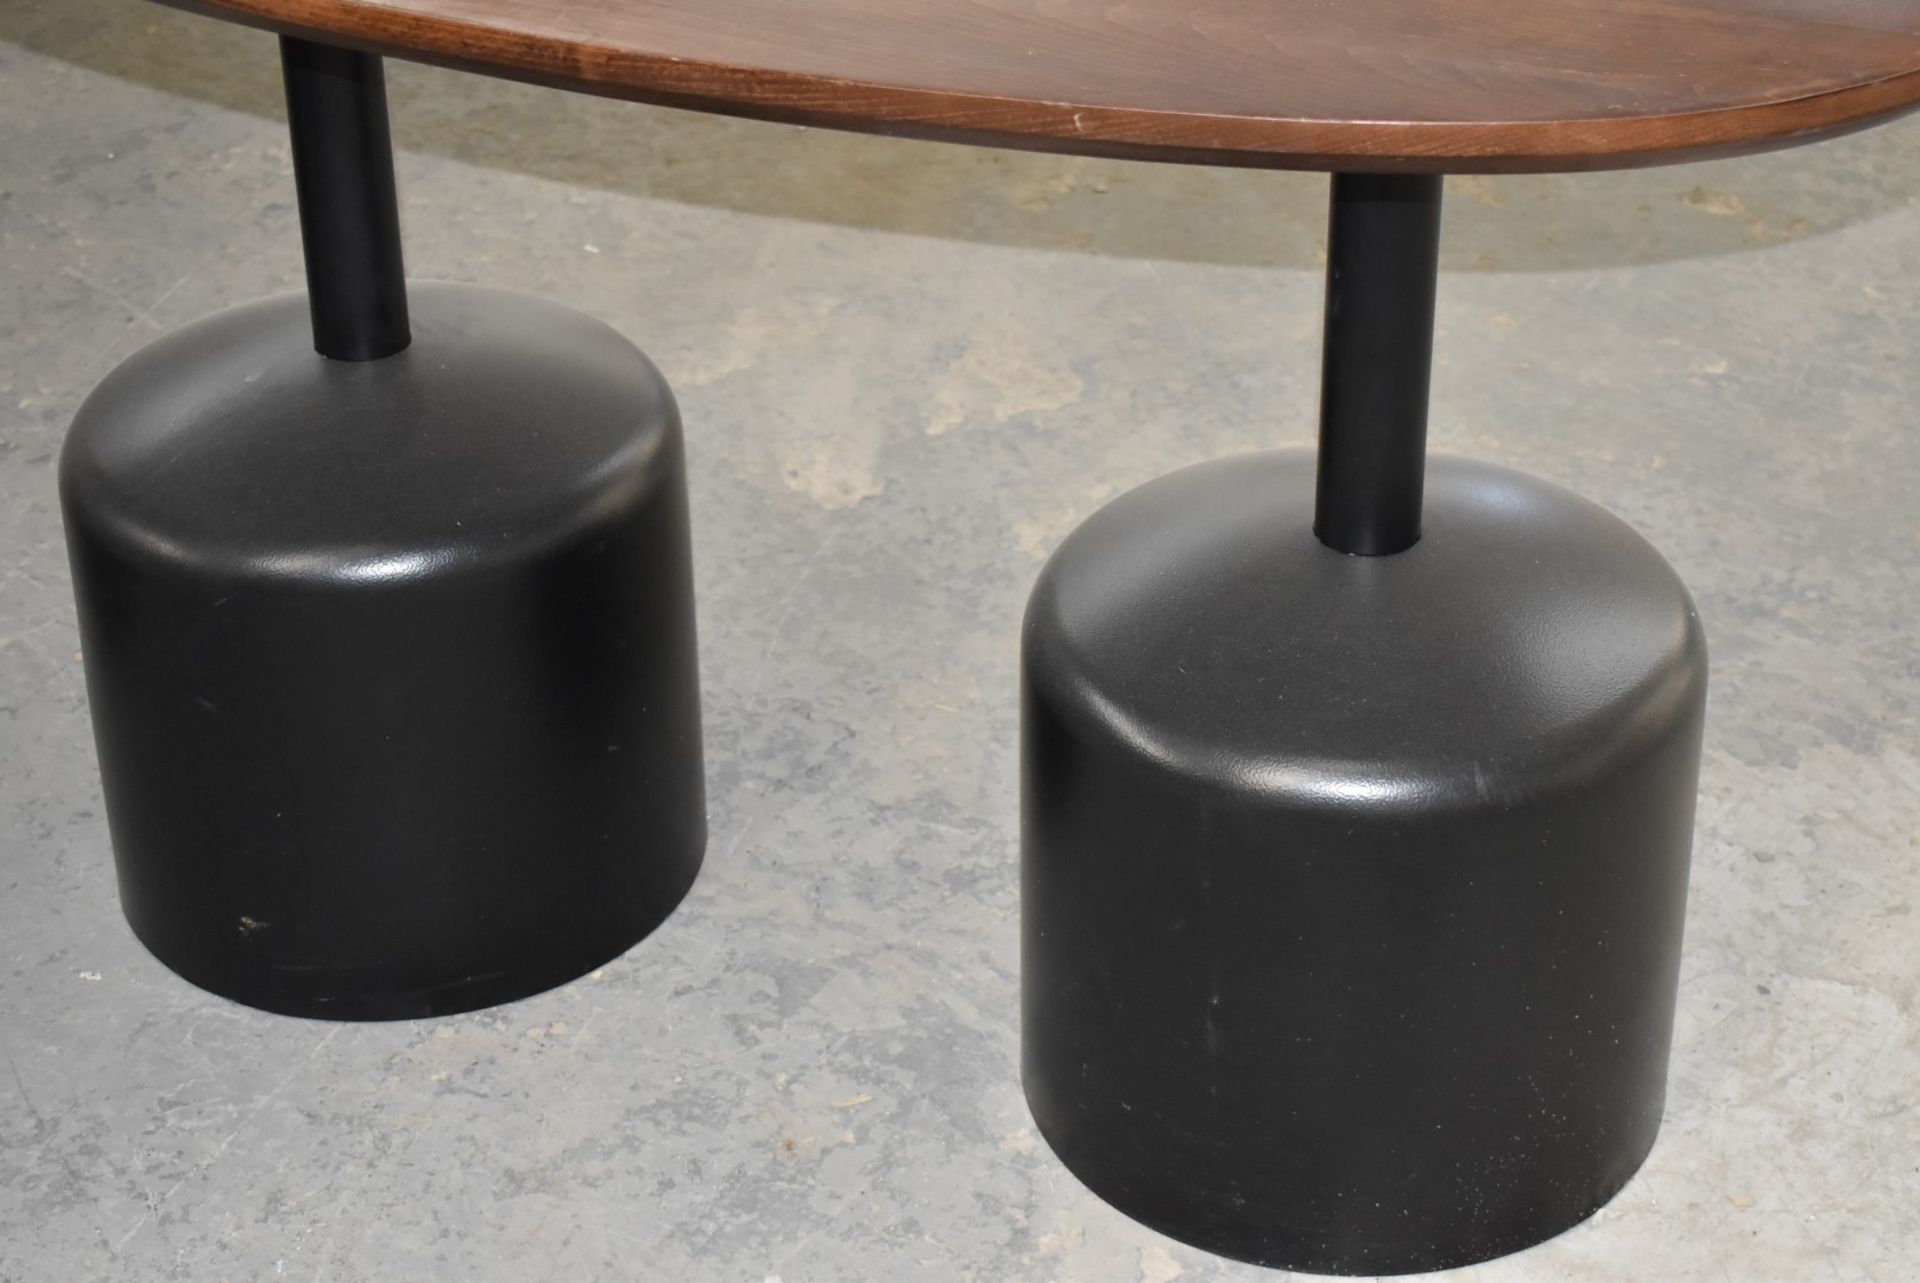 14 x Commercial Restaurant Tables Features Large Black Pedestals and Dark Stained Wooden Tops - Image 6 of 23